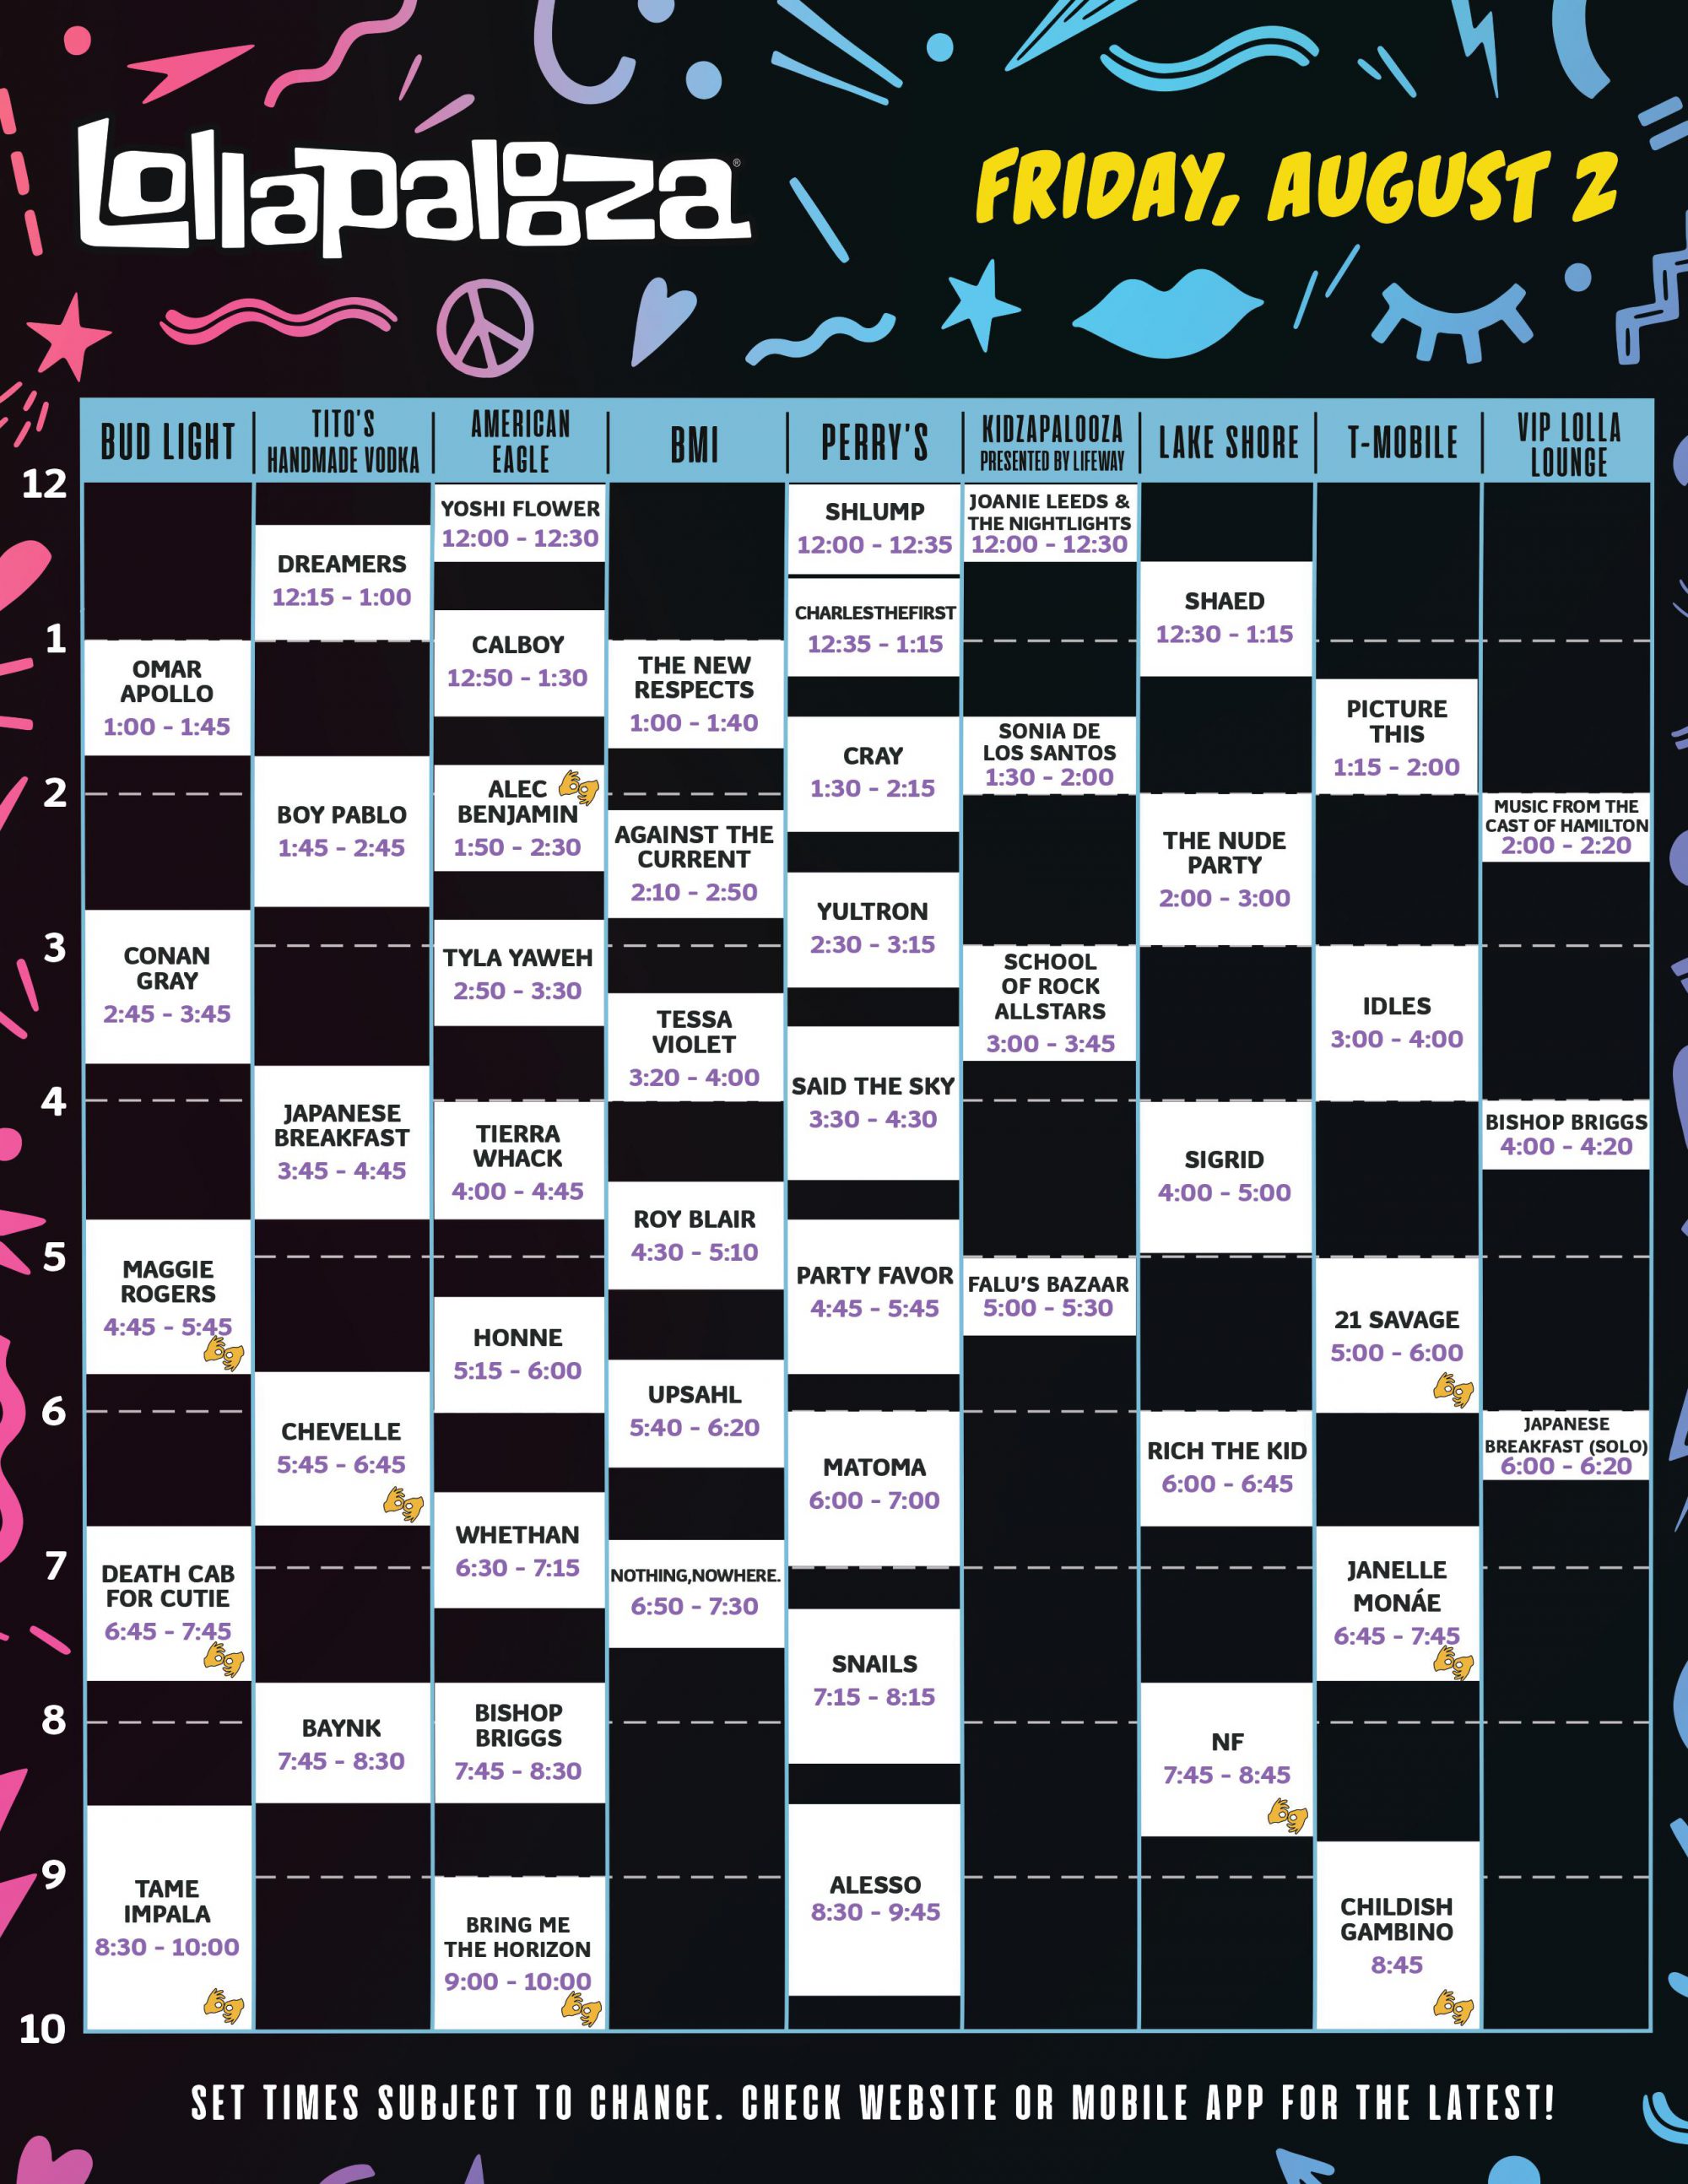 Lollapalooza 2019 Set Times, Festival Map, and More! EDM Identity